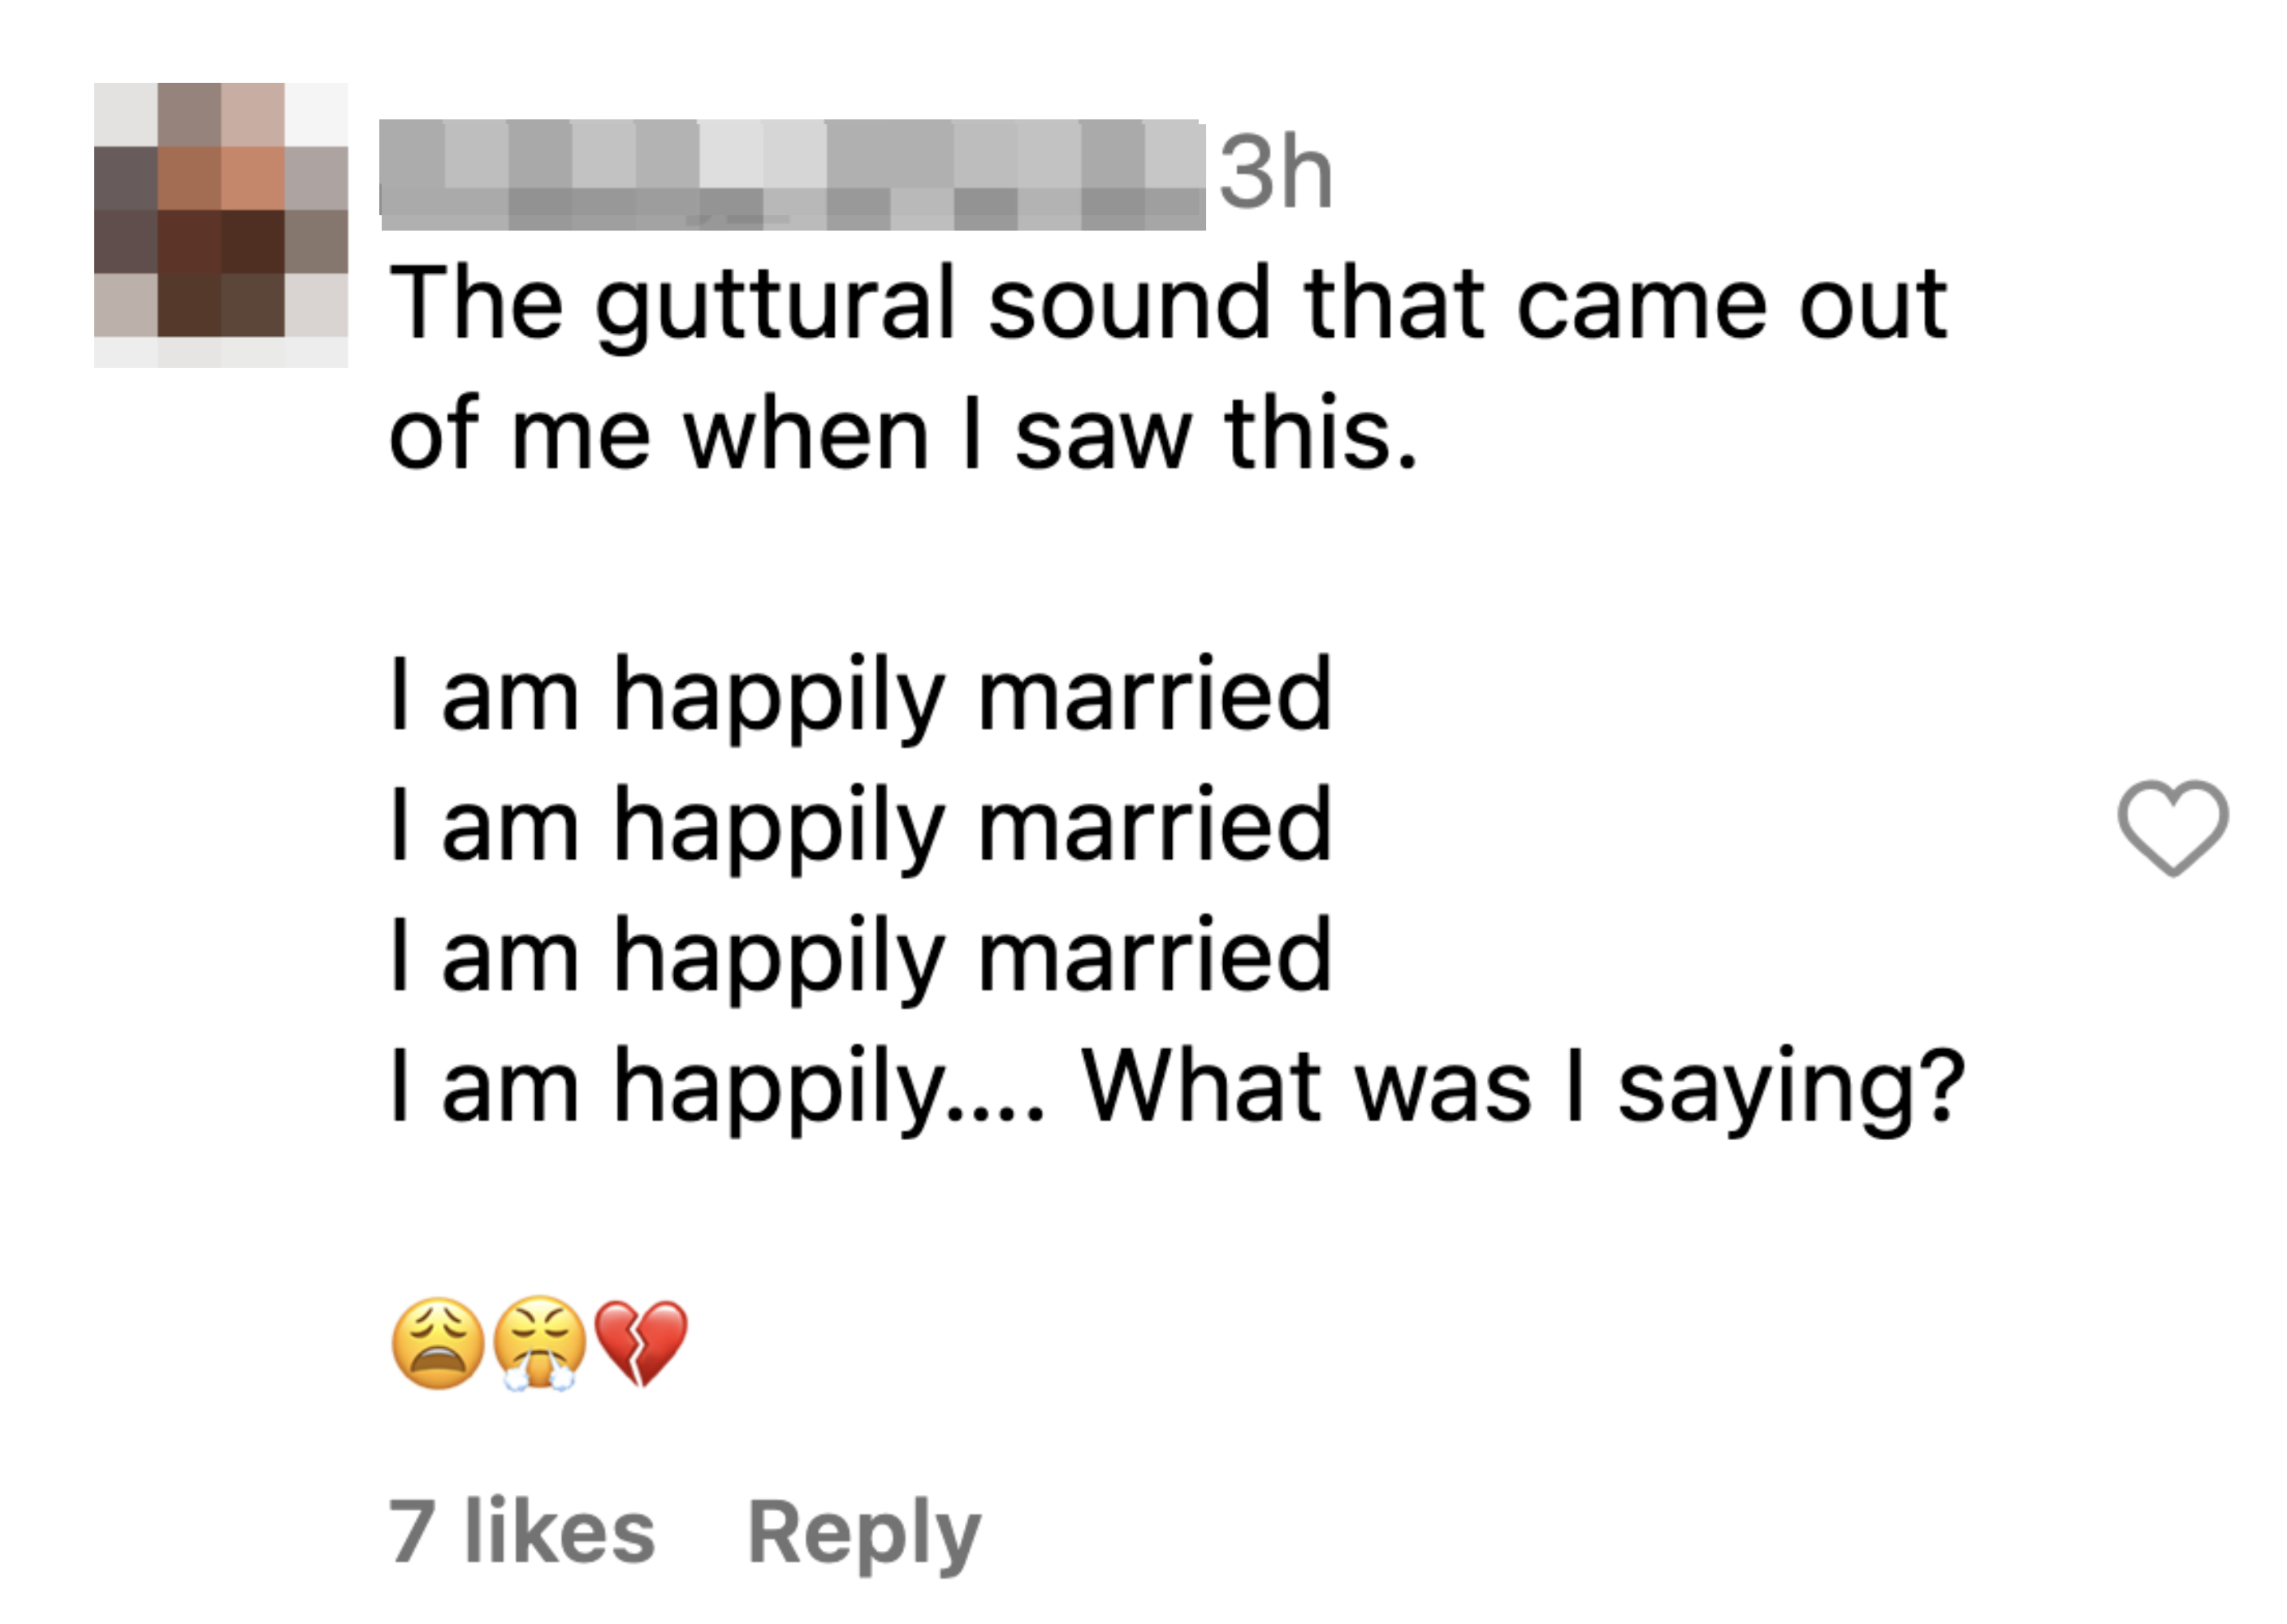 Social media user expresses shock, humorously questioning their marital bliss in a comment with emojis